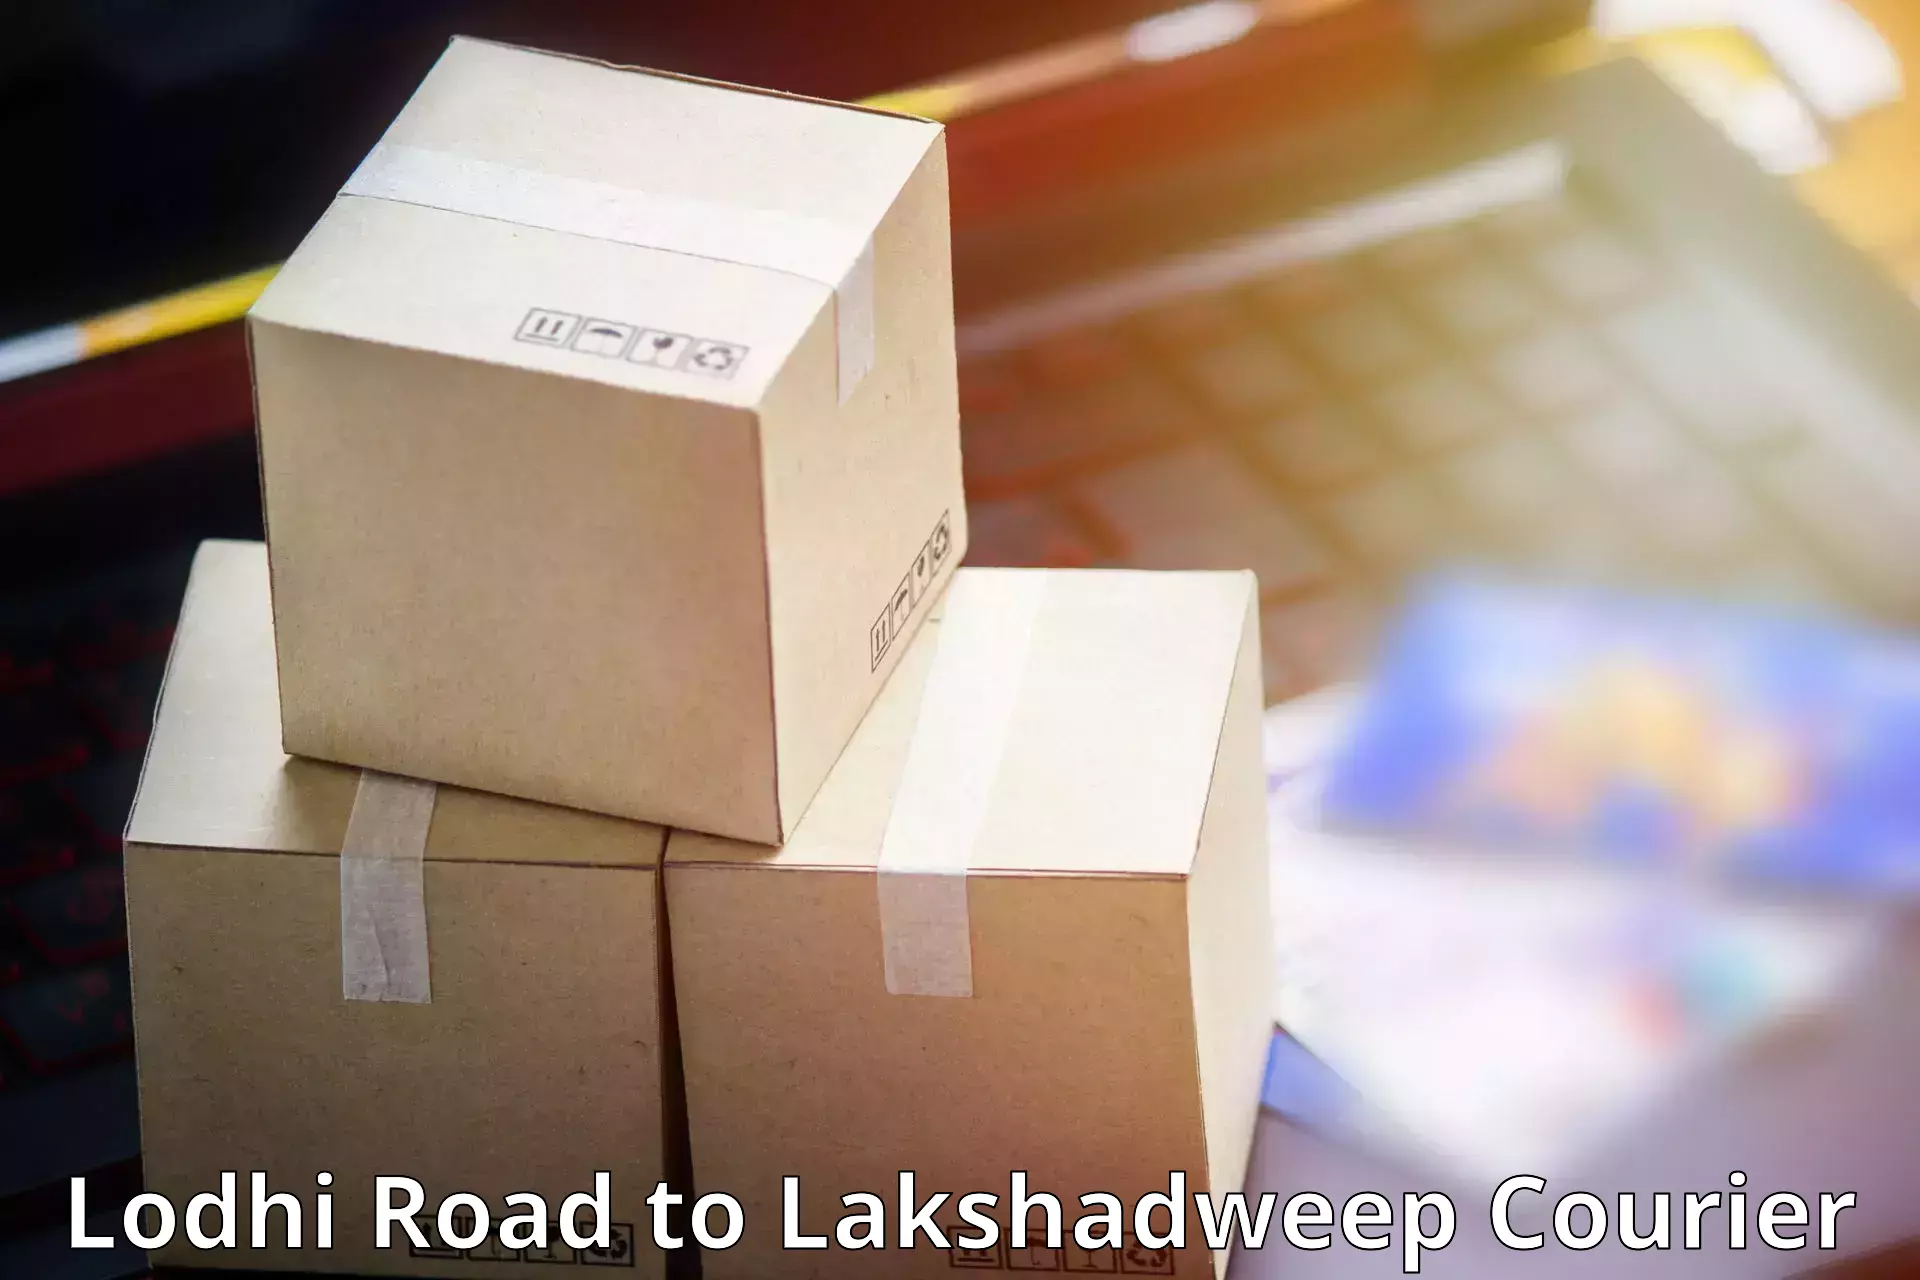 Subscription-based courier Lodhi Road to Lakshadweep